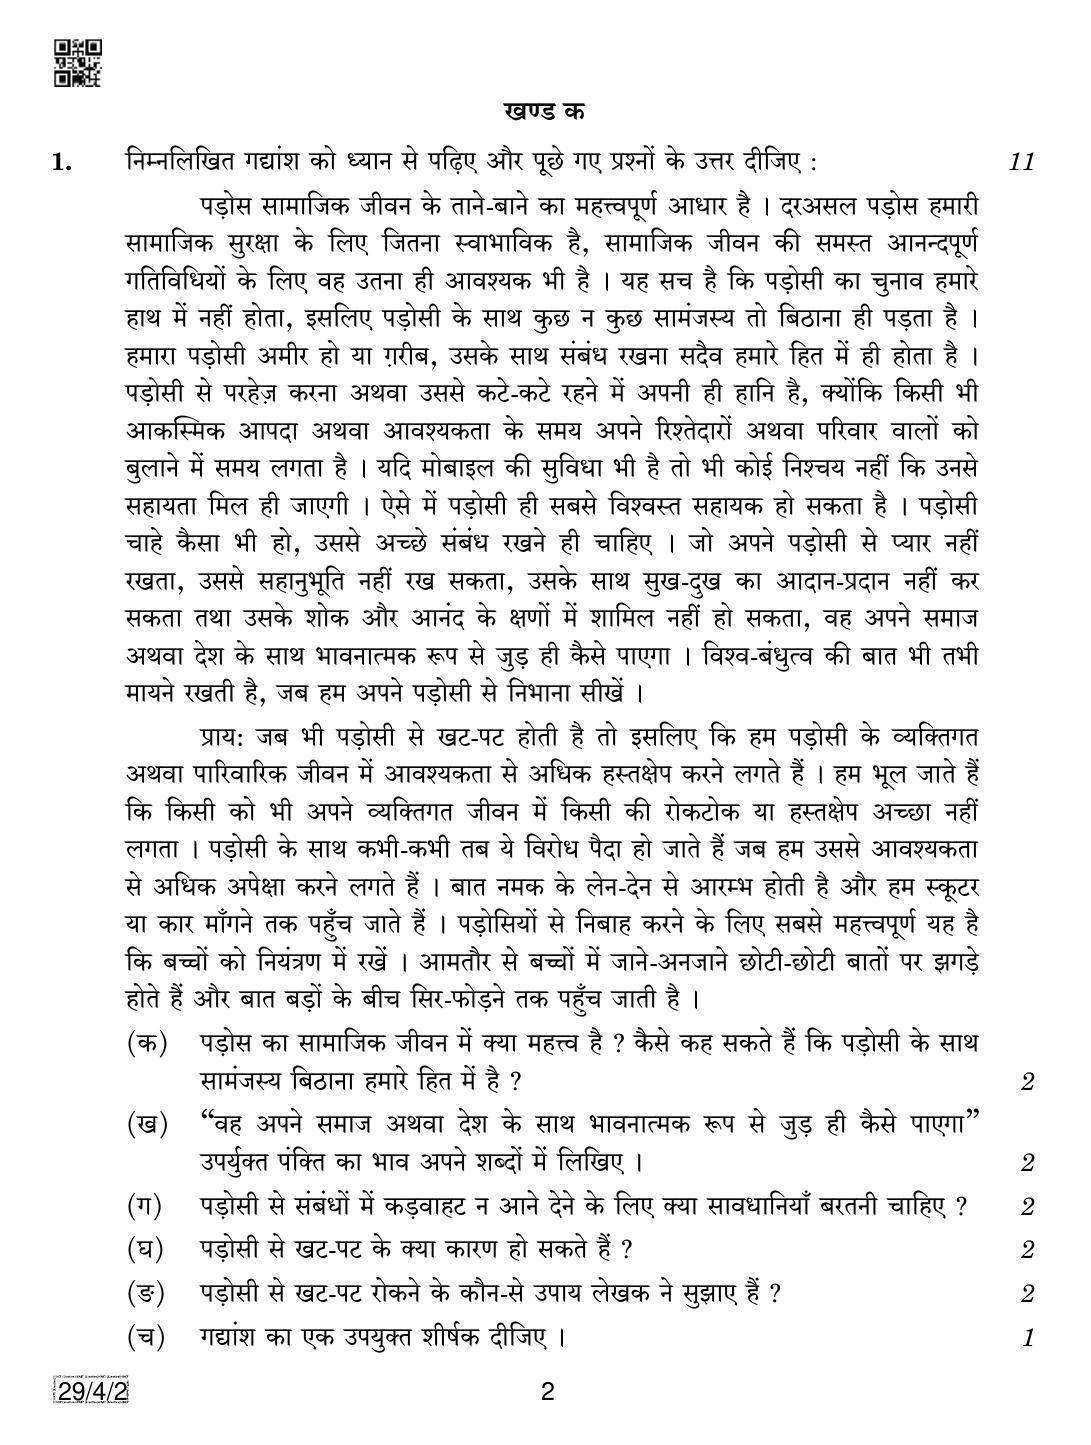 CBSE Class 12 29-4-2 Hindi Elective 2019 Question Paper - Page 2